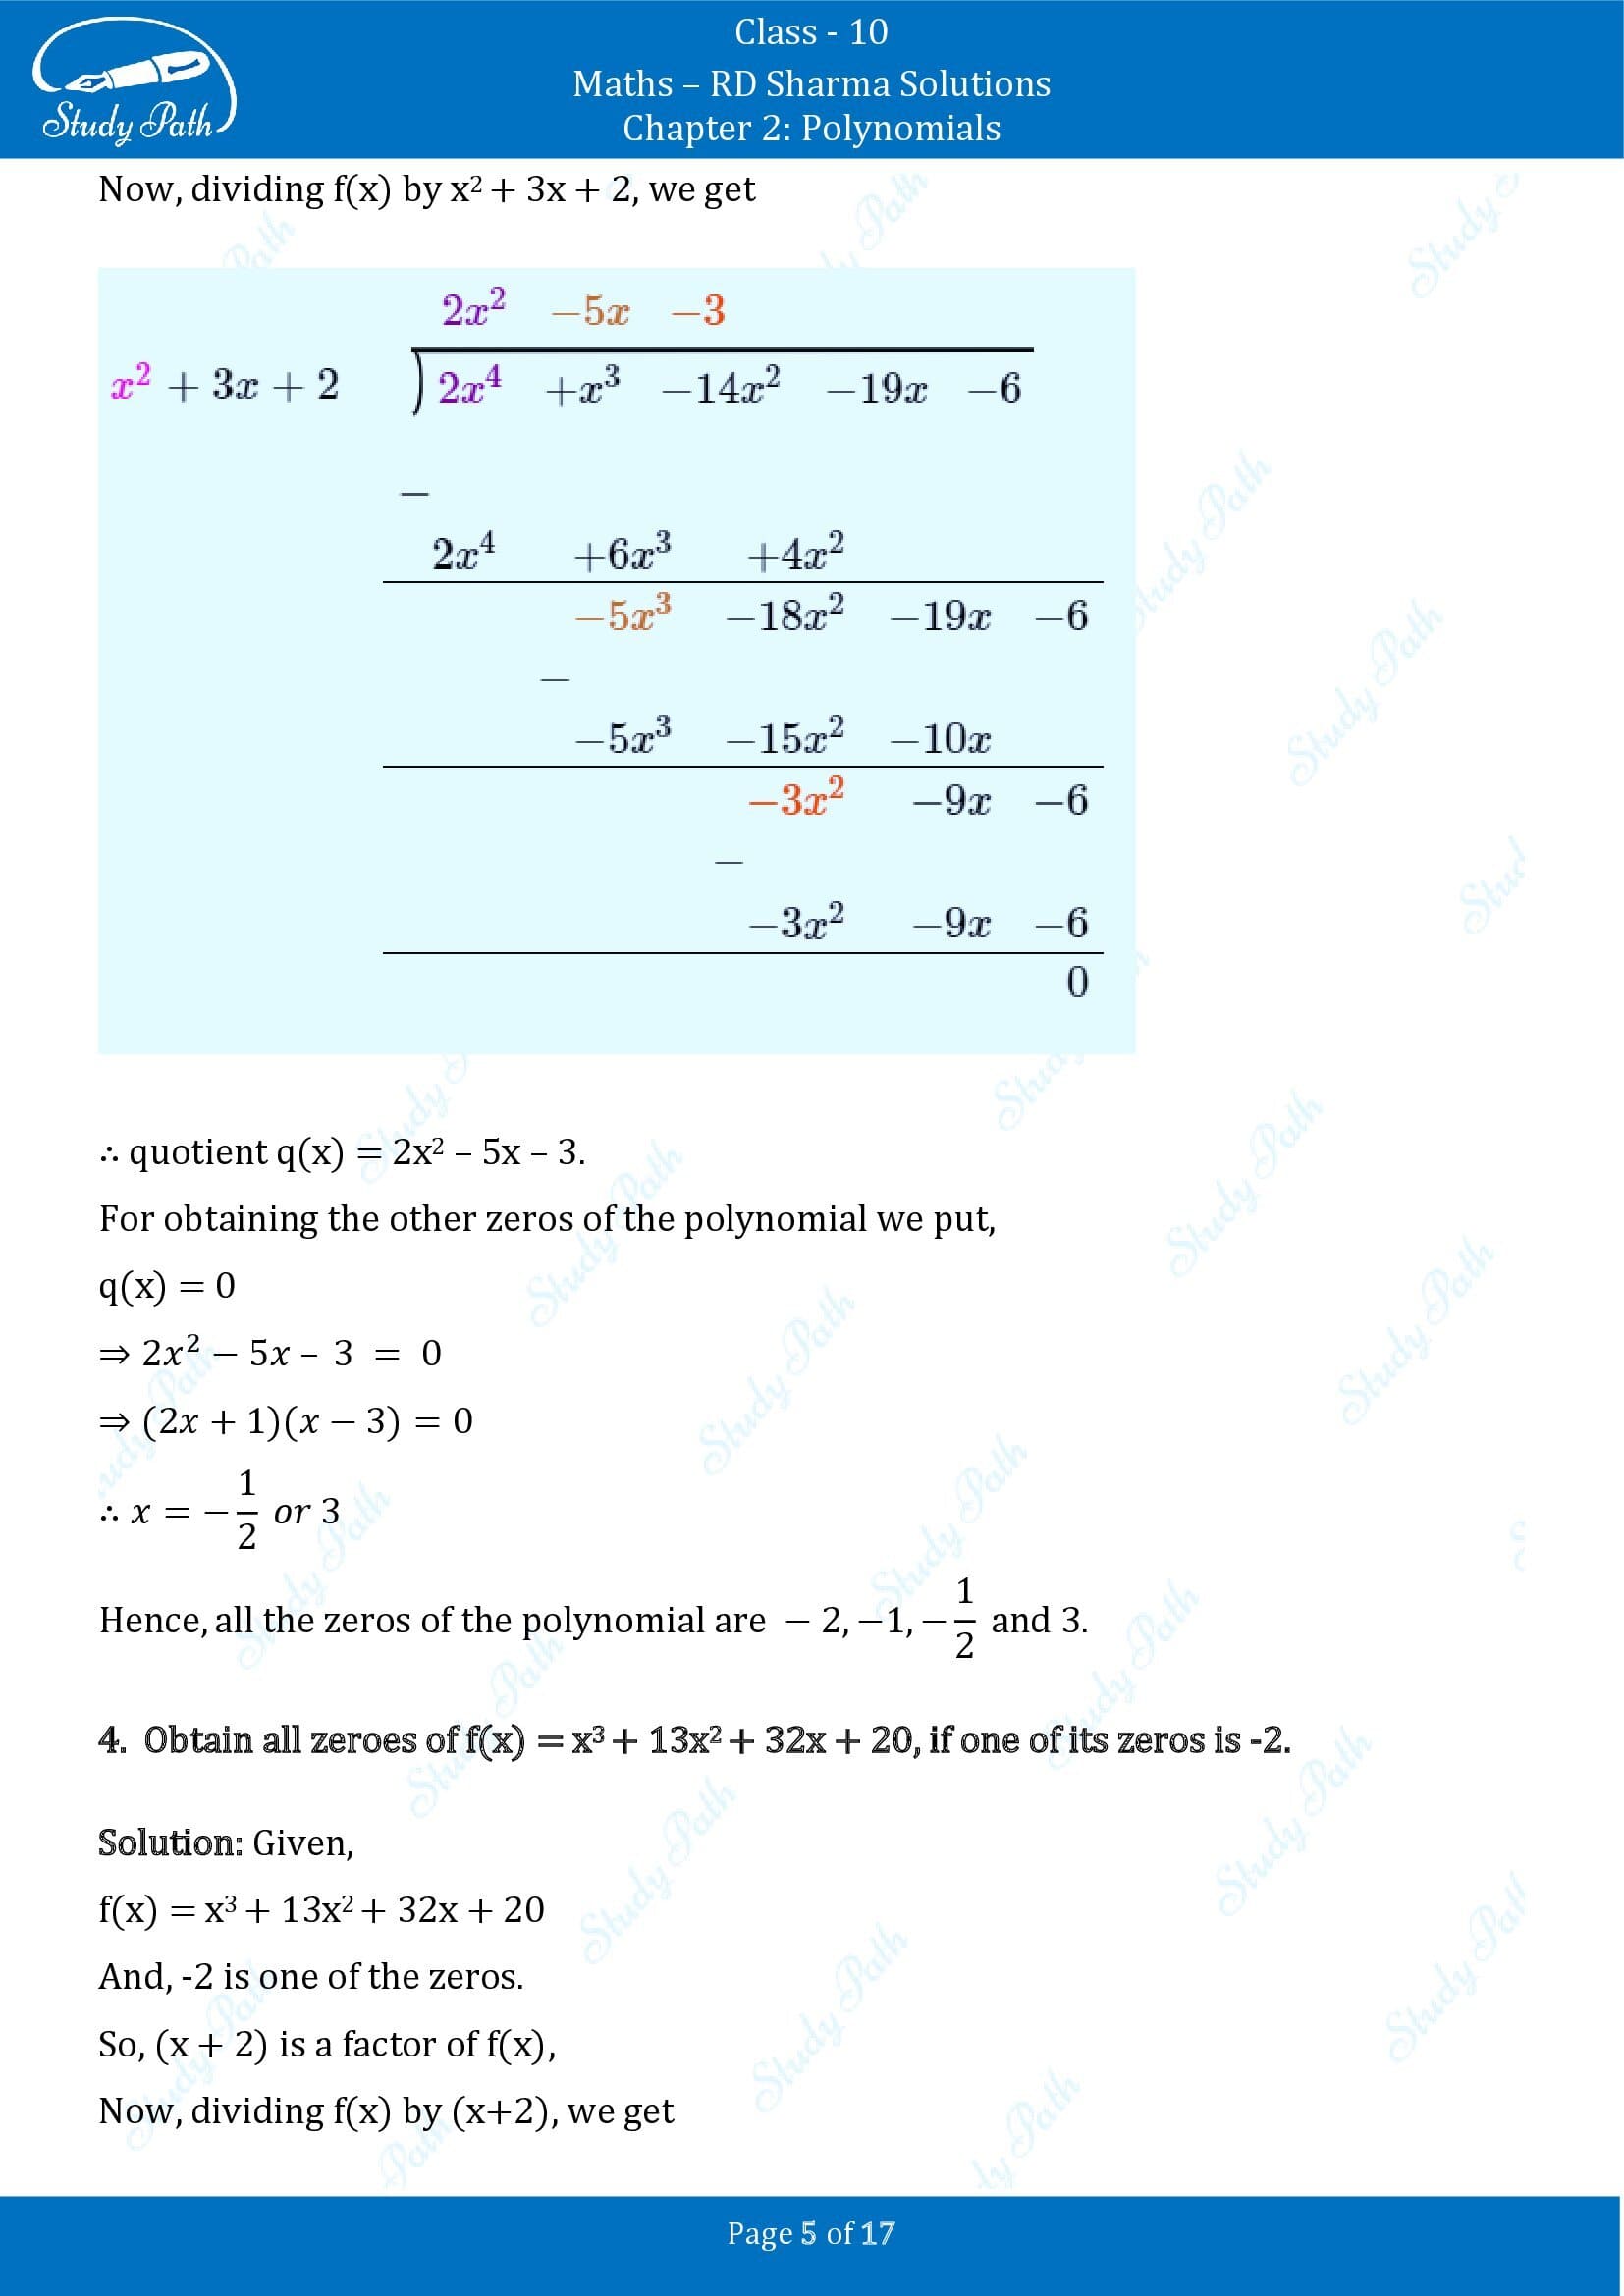 RD Sharma Solutions Class 10 Chapter 2 Polynomials Exercise 2.3 00005